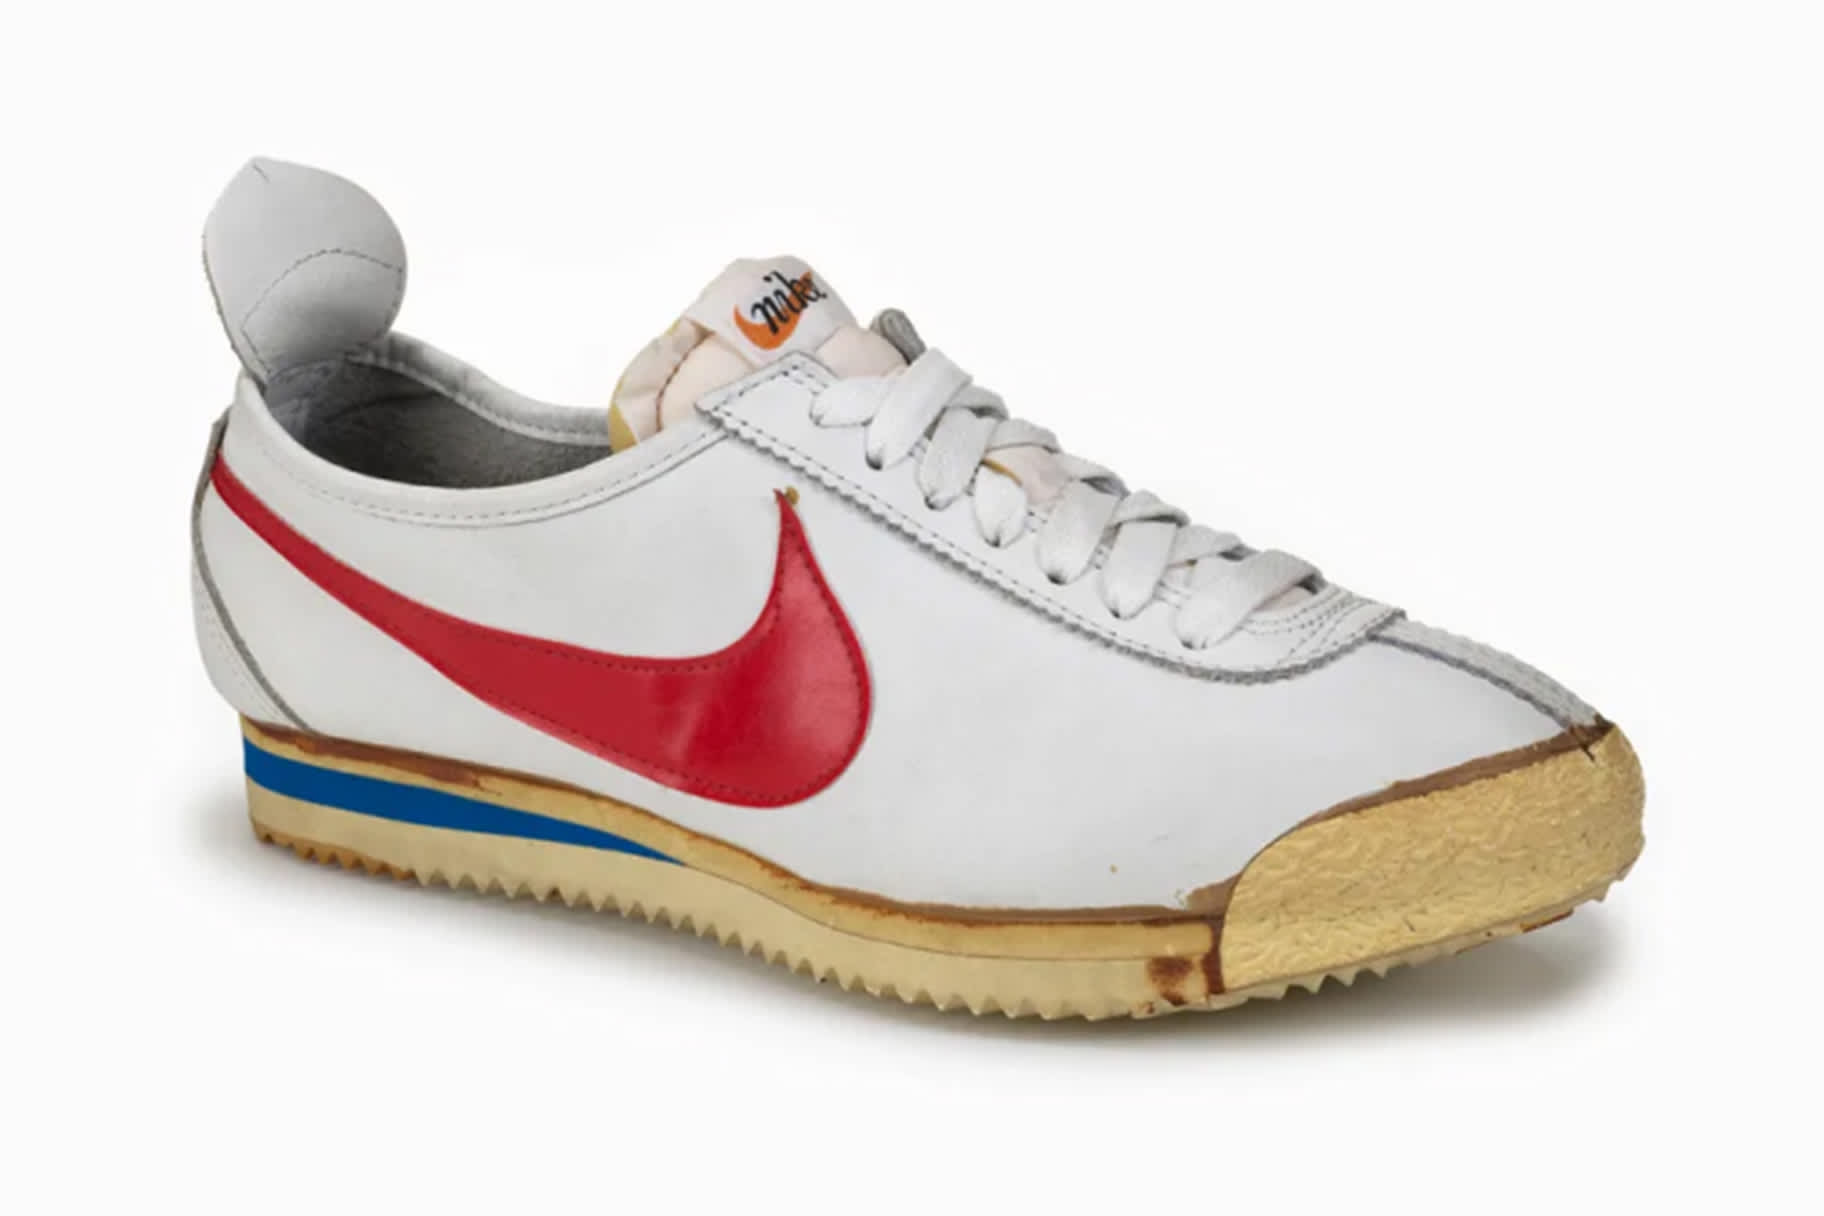 The History of the Cortez